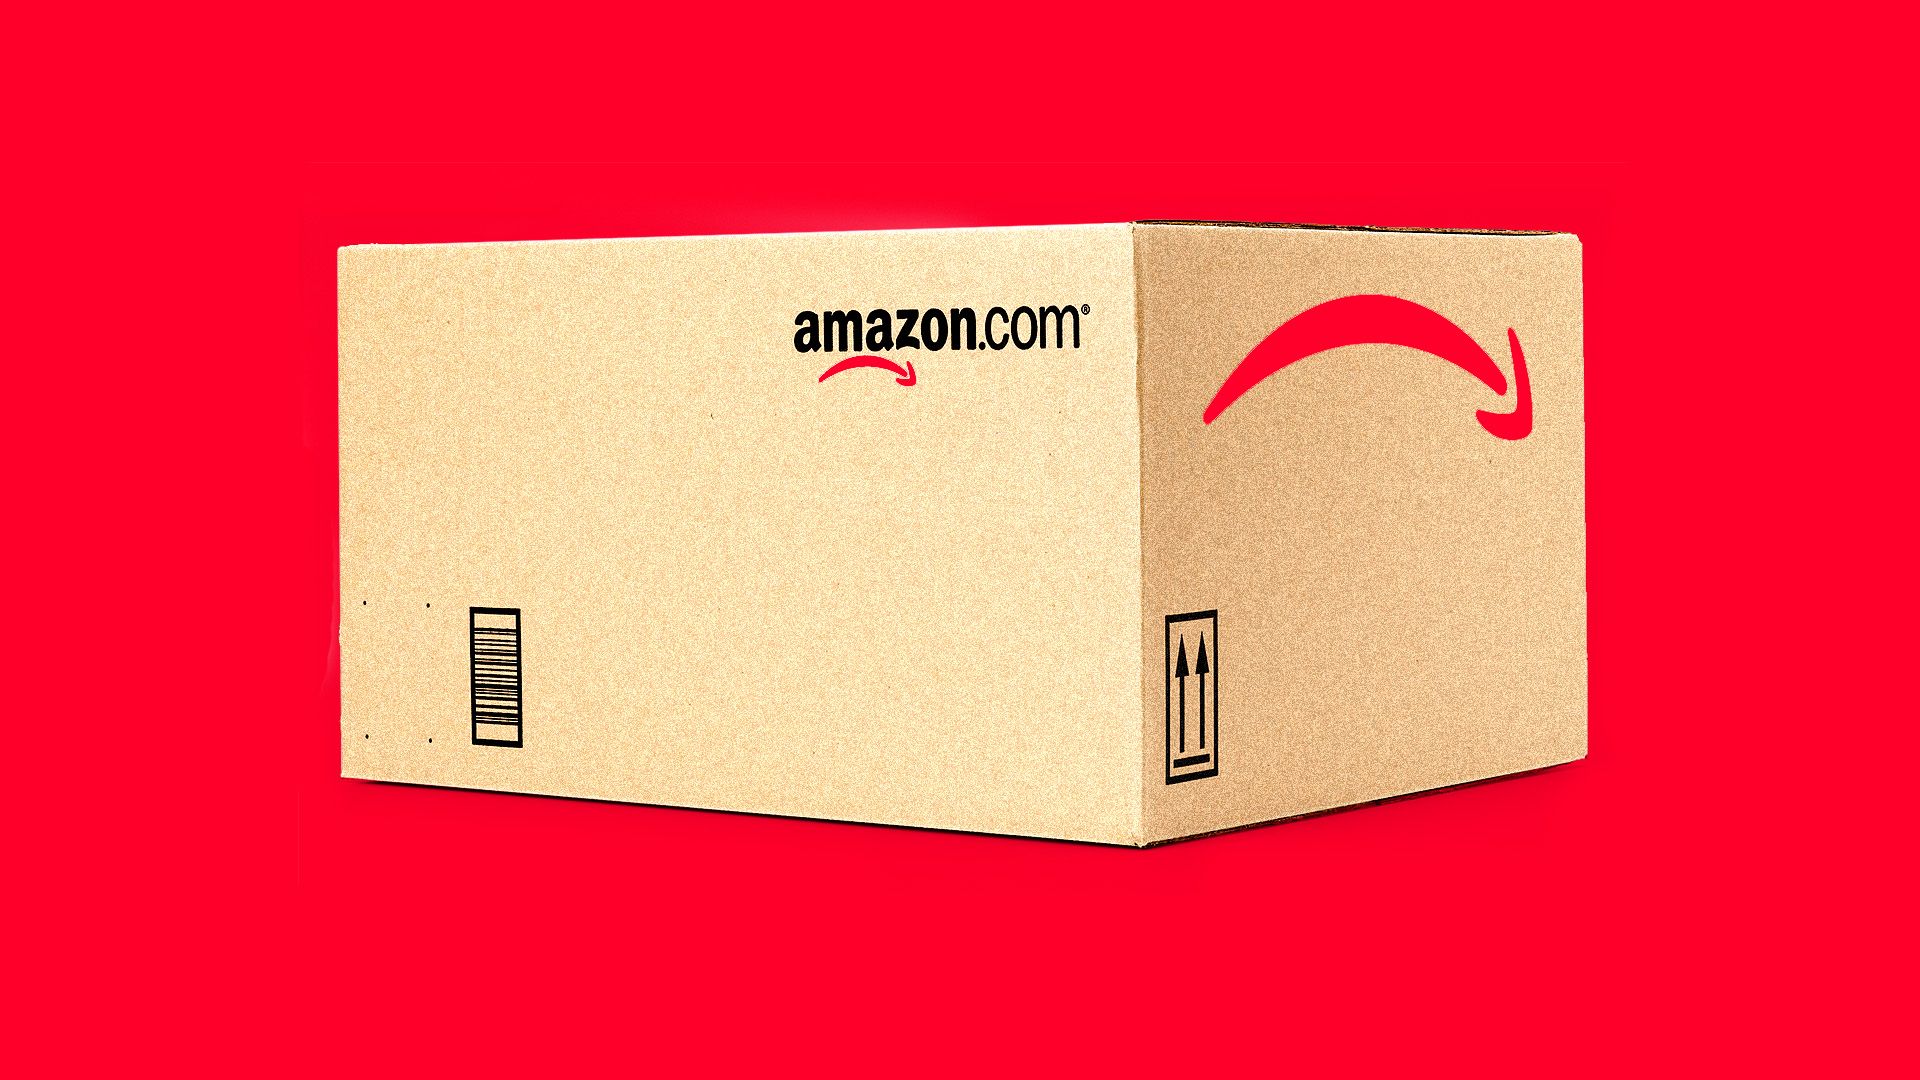 An Amazon box with a frown instead of a smile logo